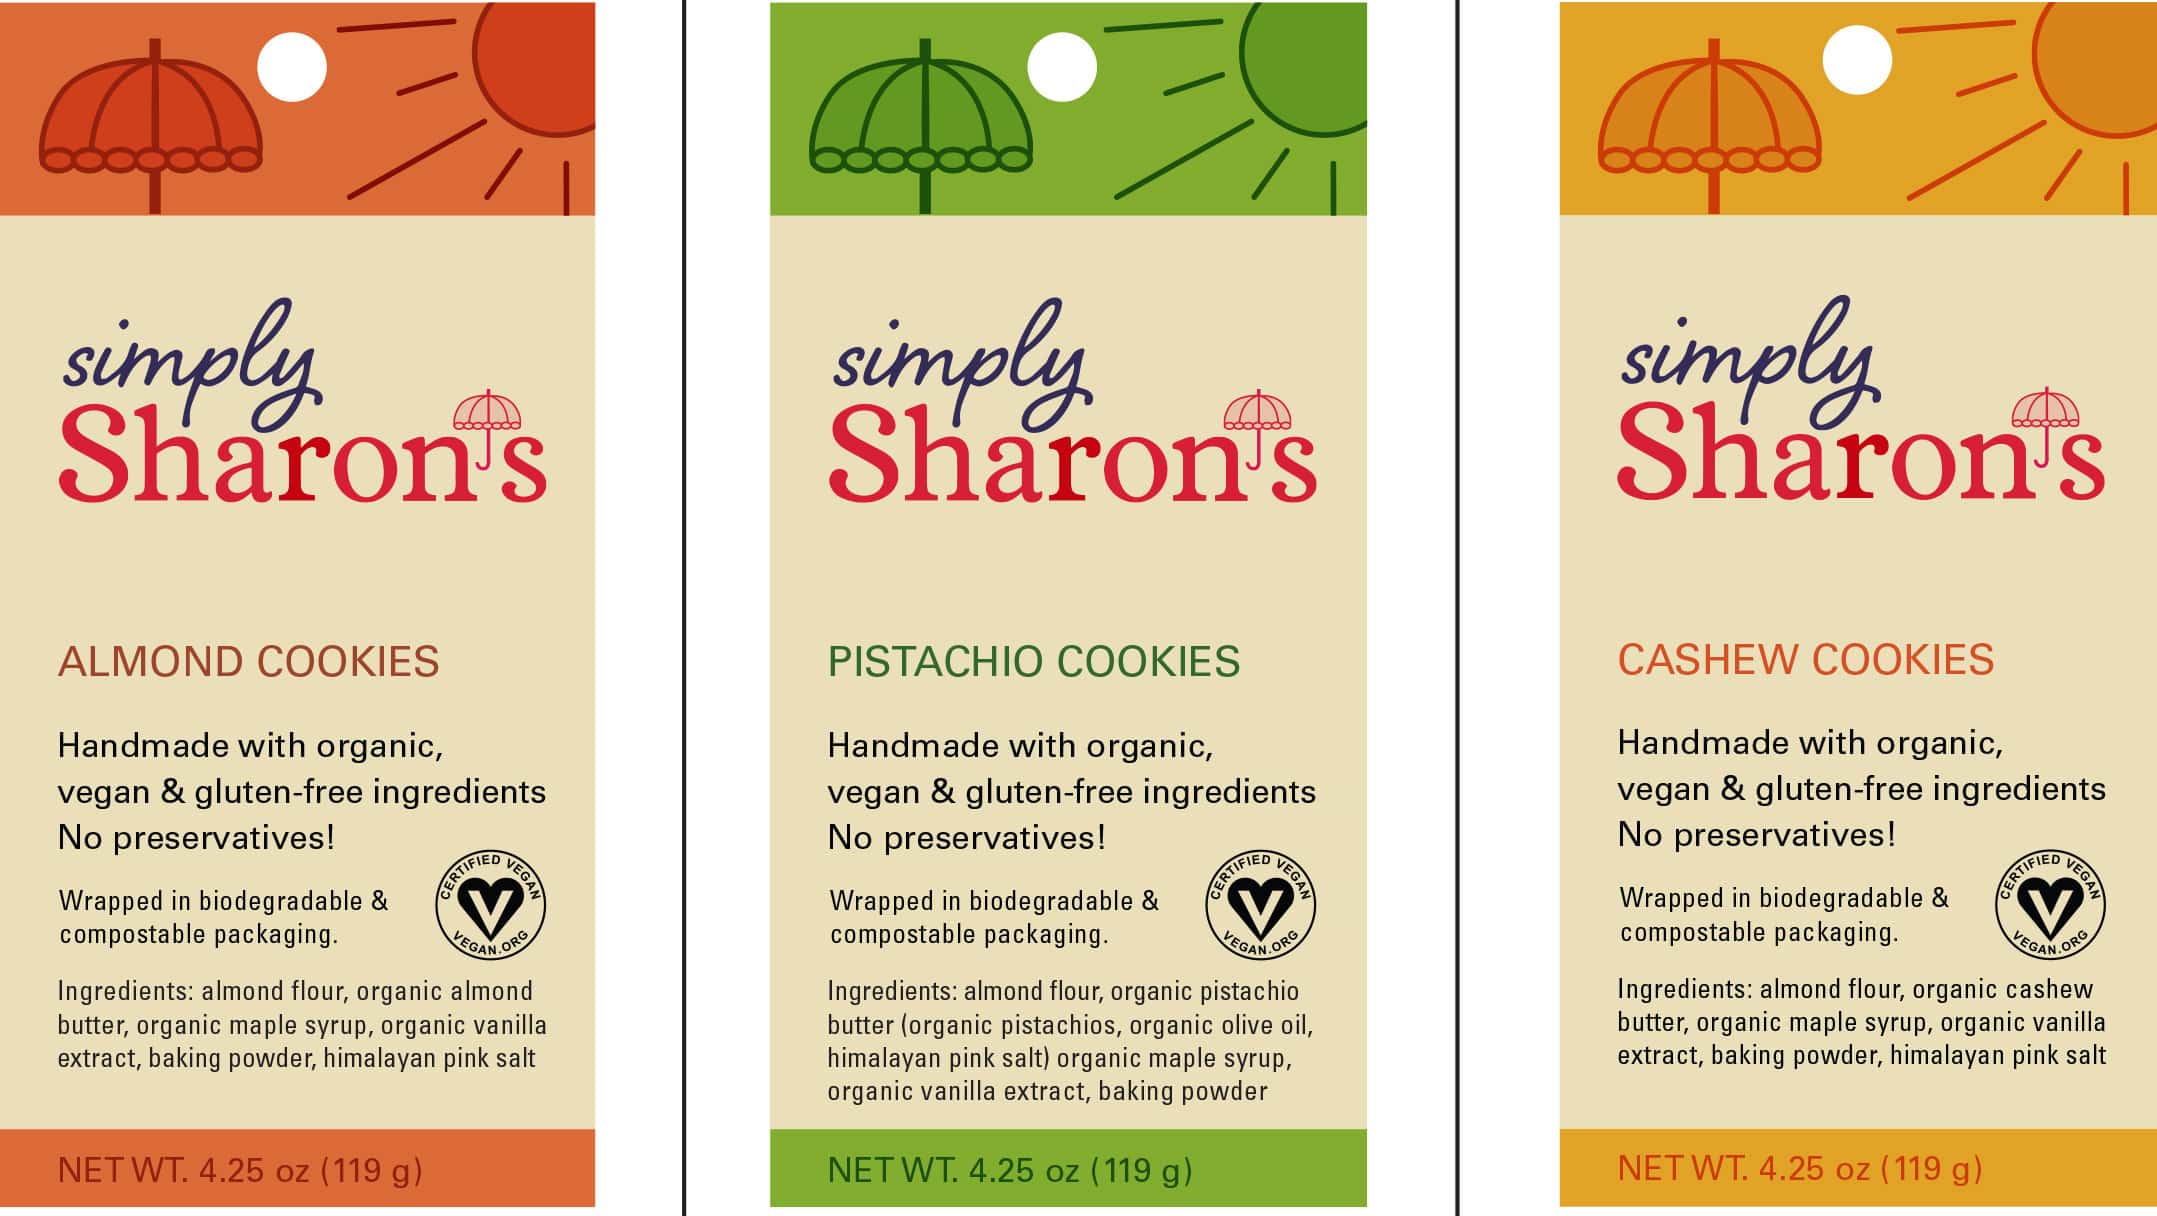 Simply Sharon's eco friendly food packaging design for labels with warm earthy colors, inviting designs, and logo above ingredients list.